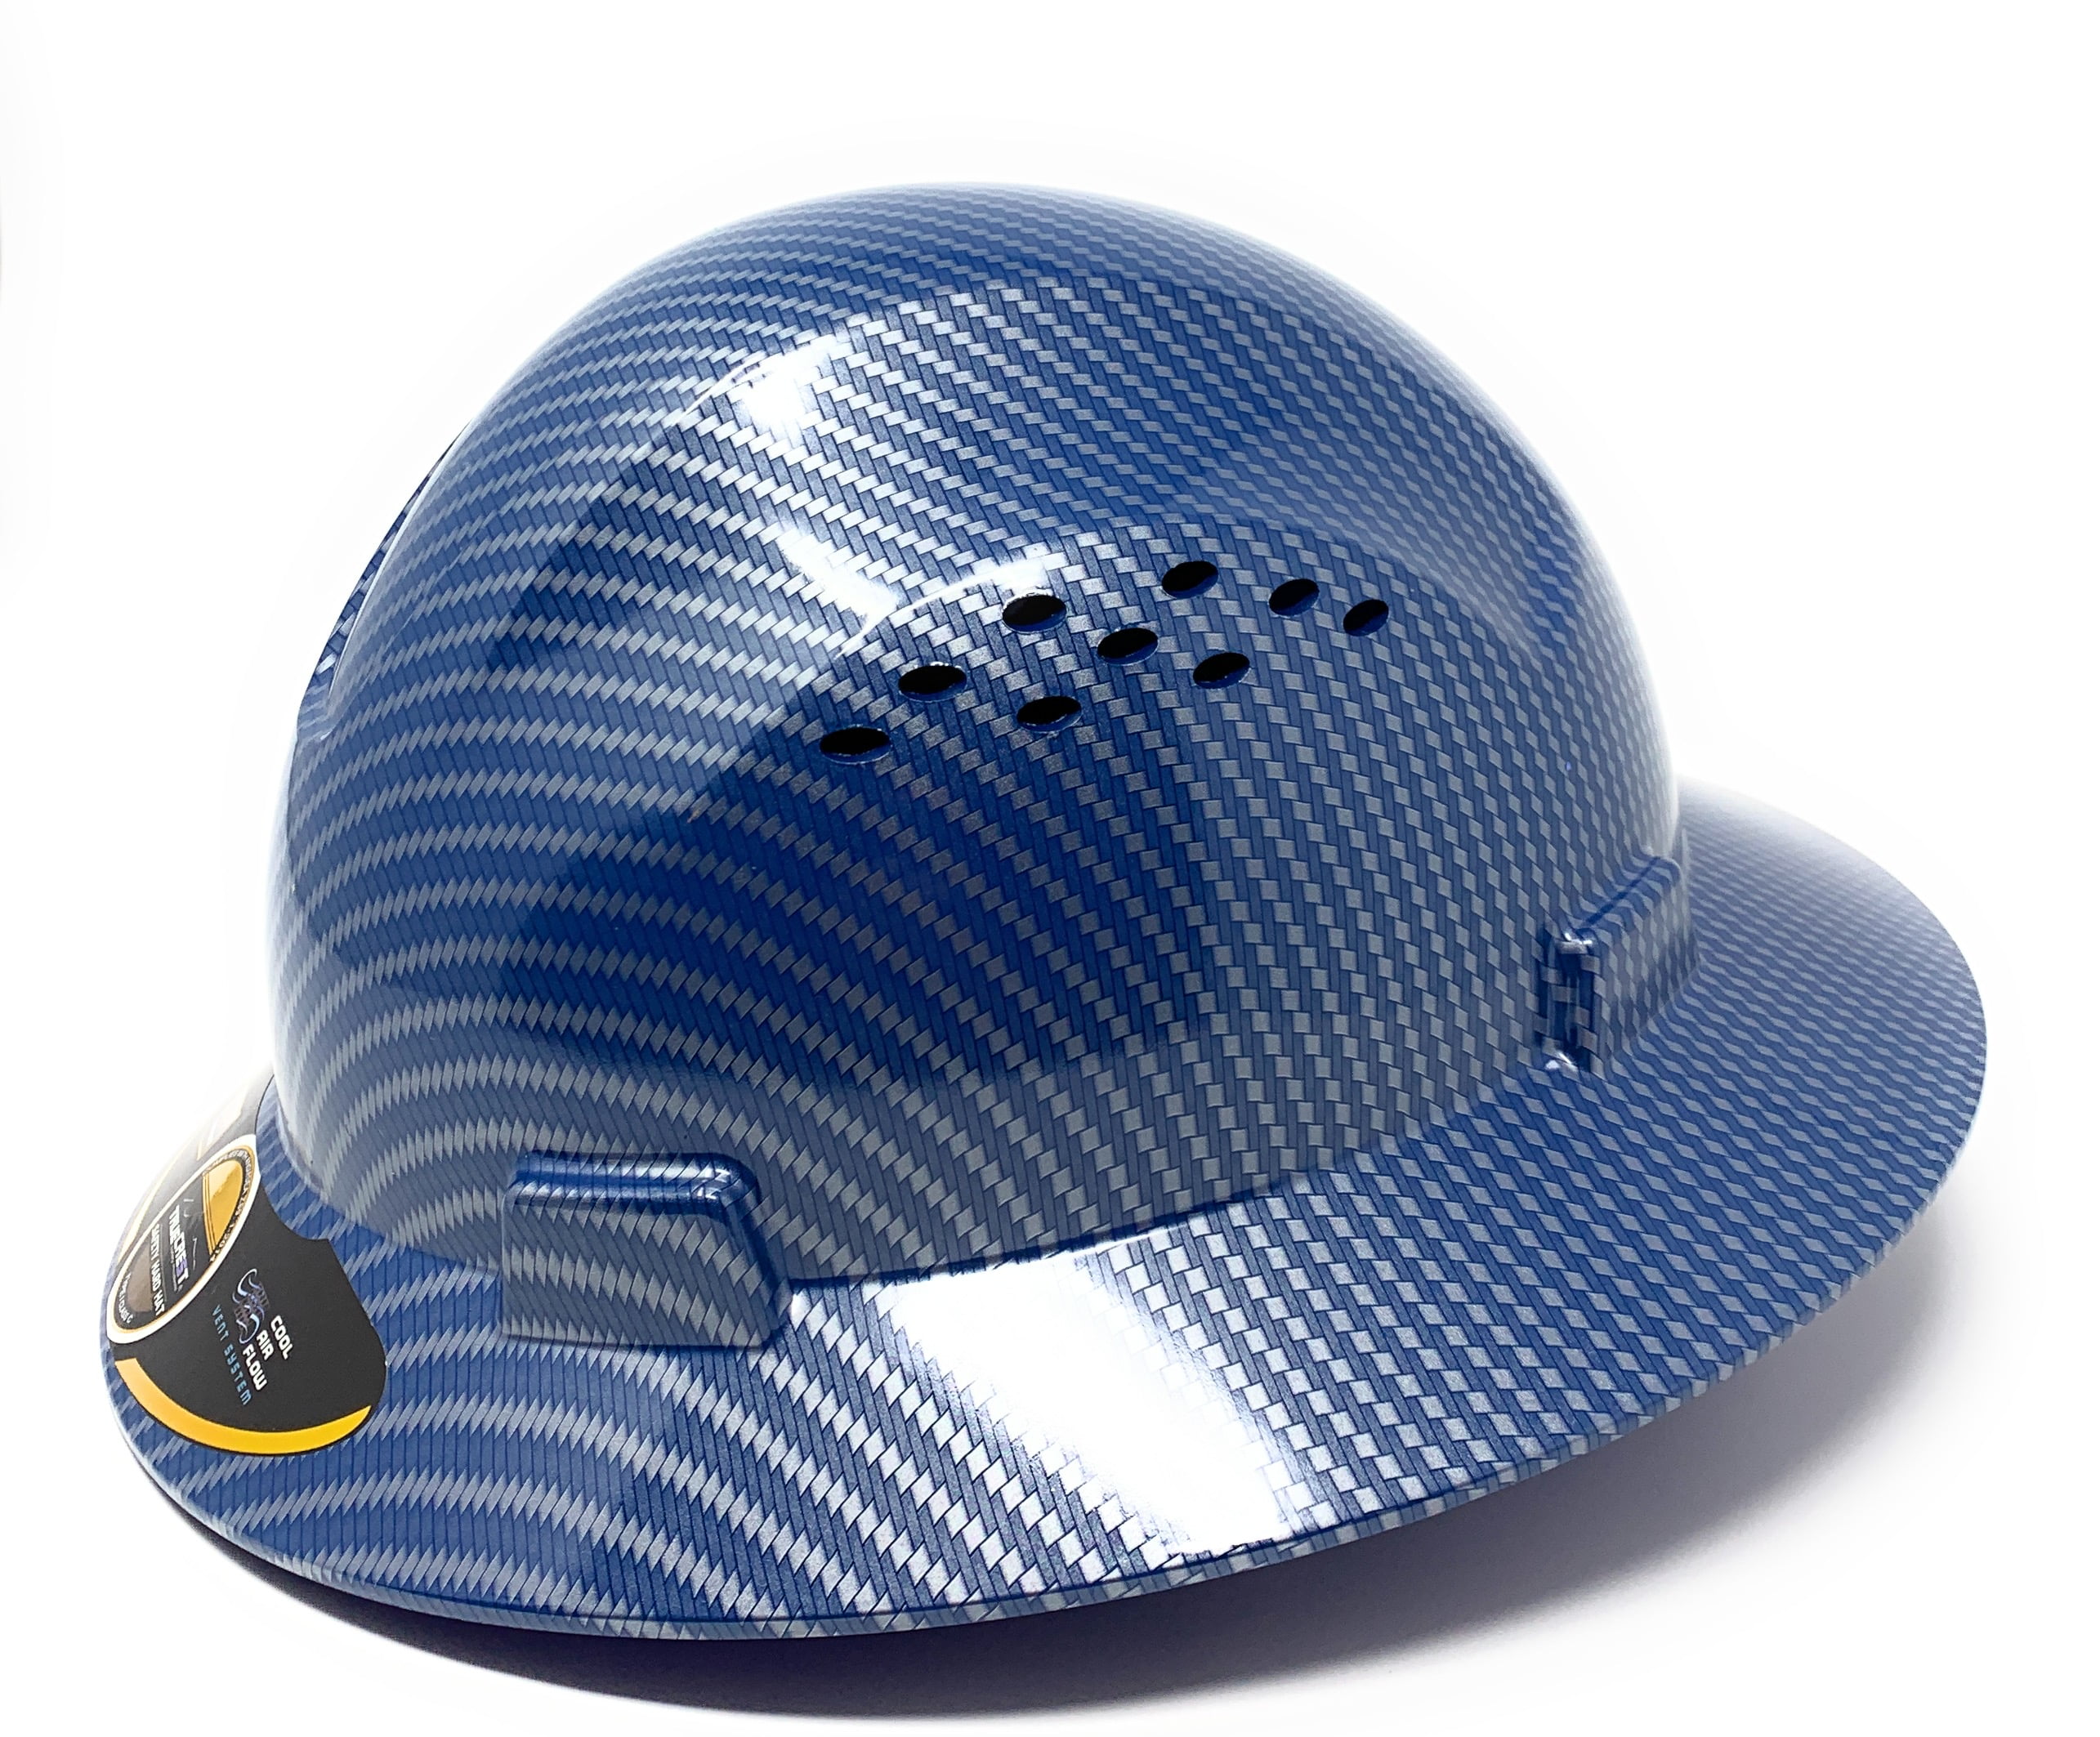 HDPE Hydro Dipped Full Brim Hard Hat with Fas-trac Suspension White